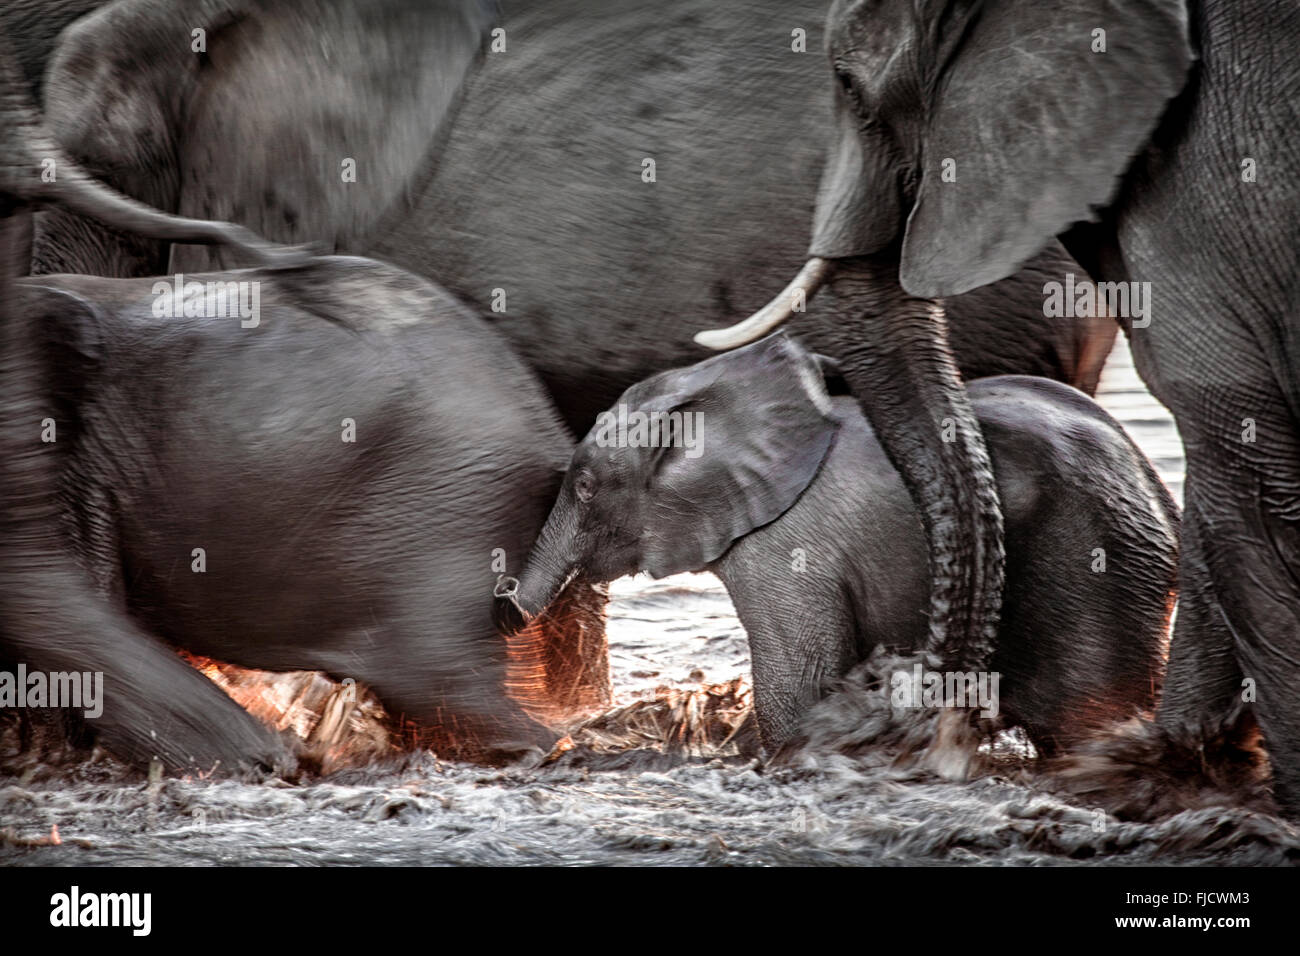 Elephant calf being herded through water Stock Photo